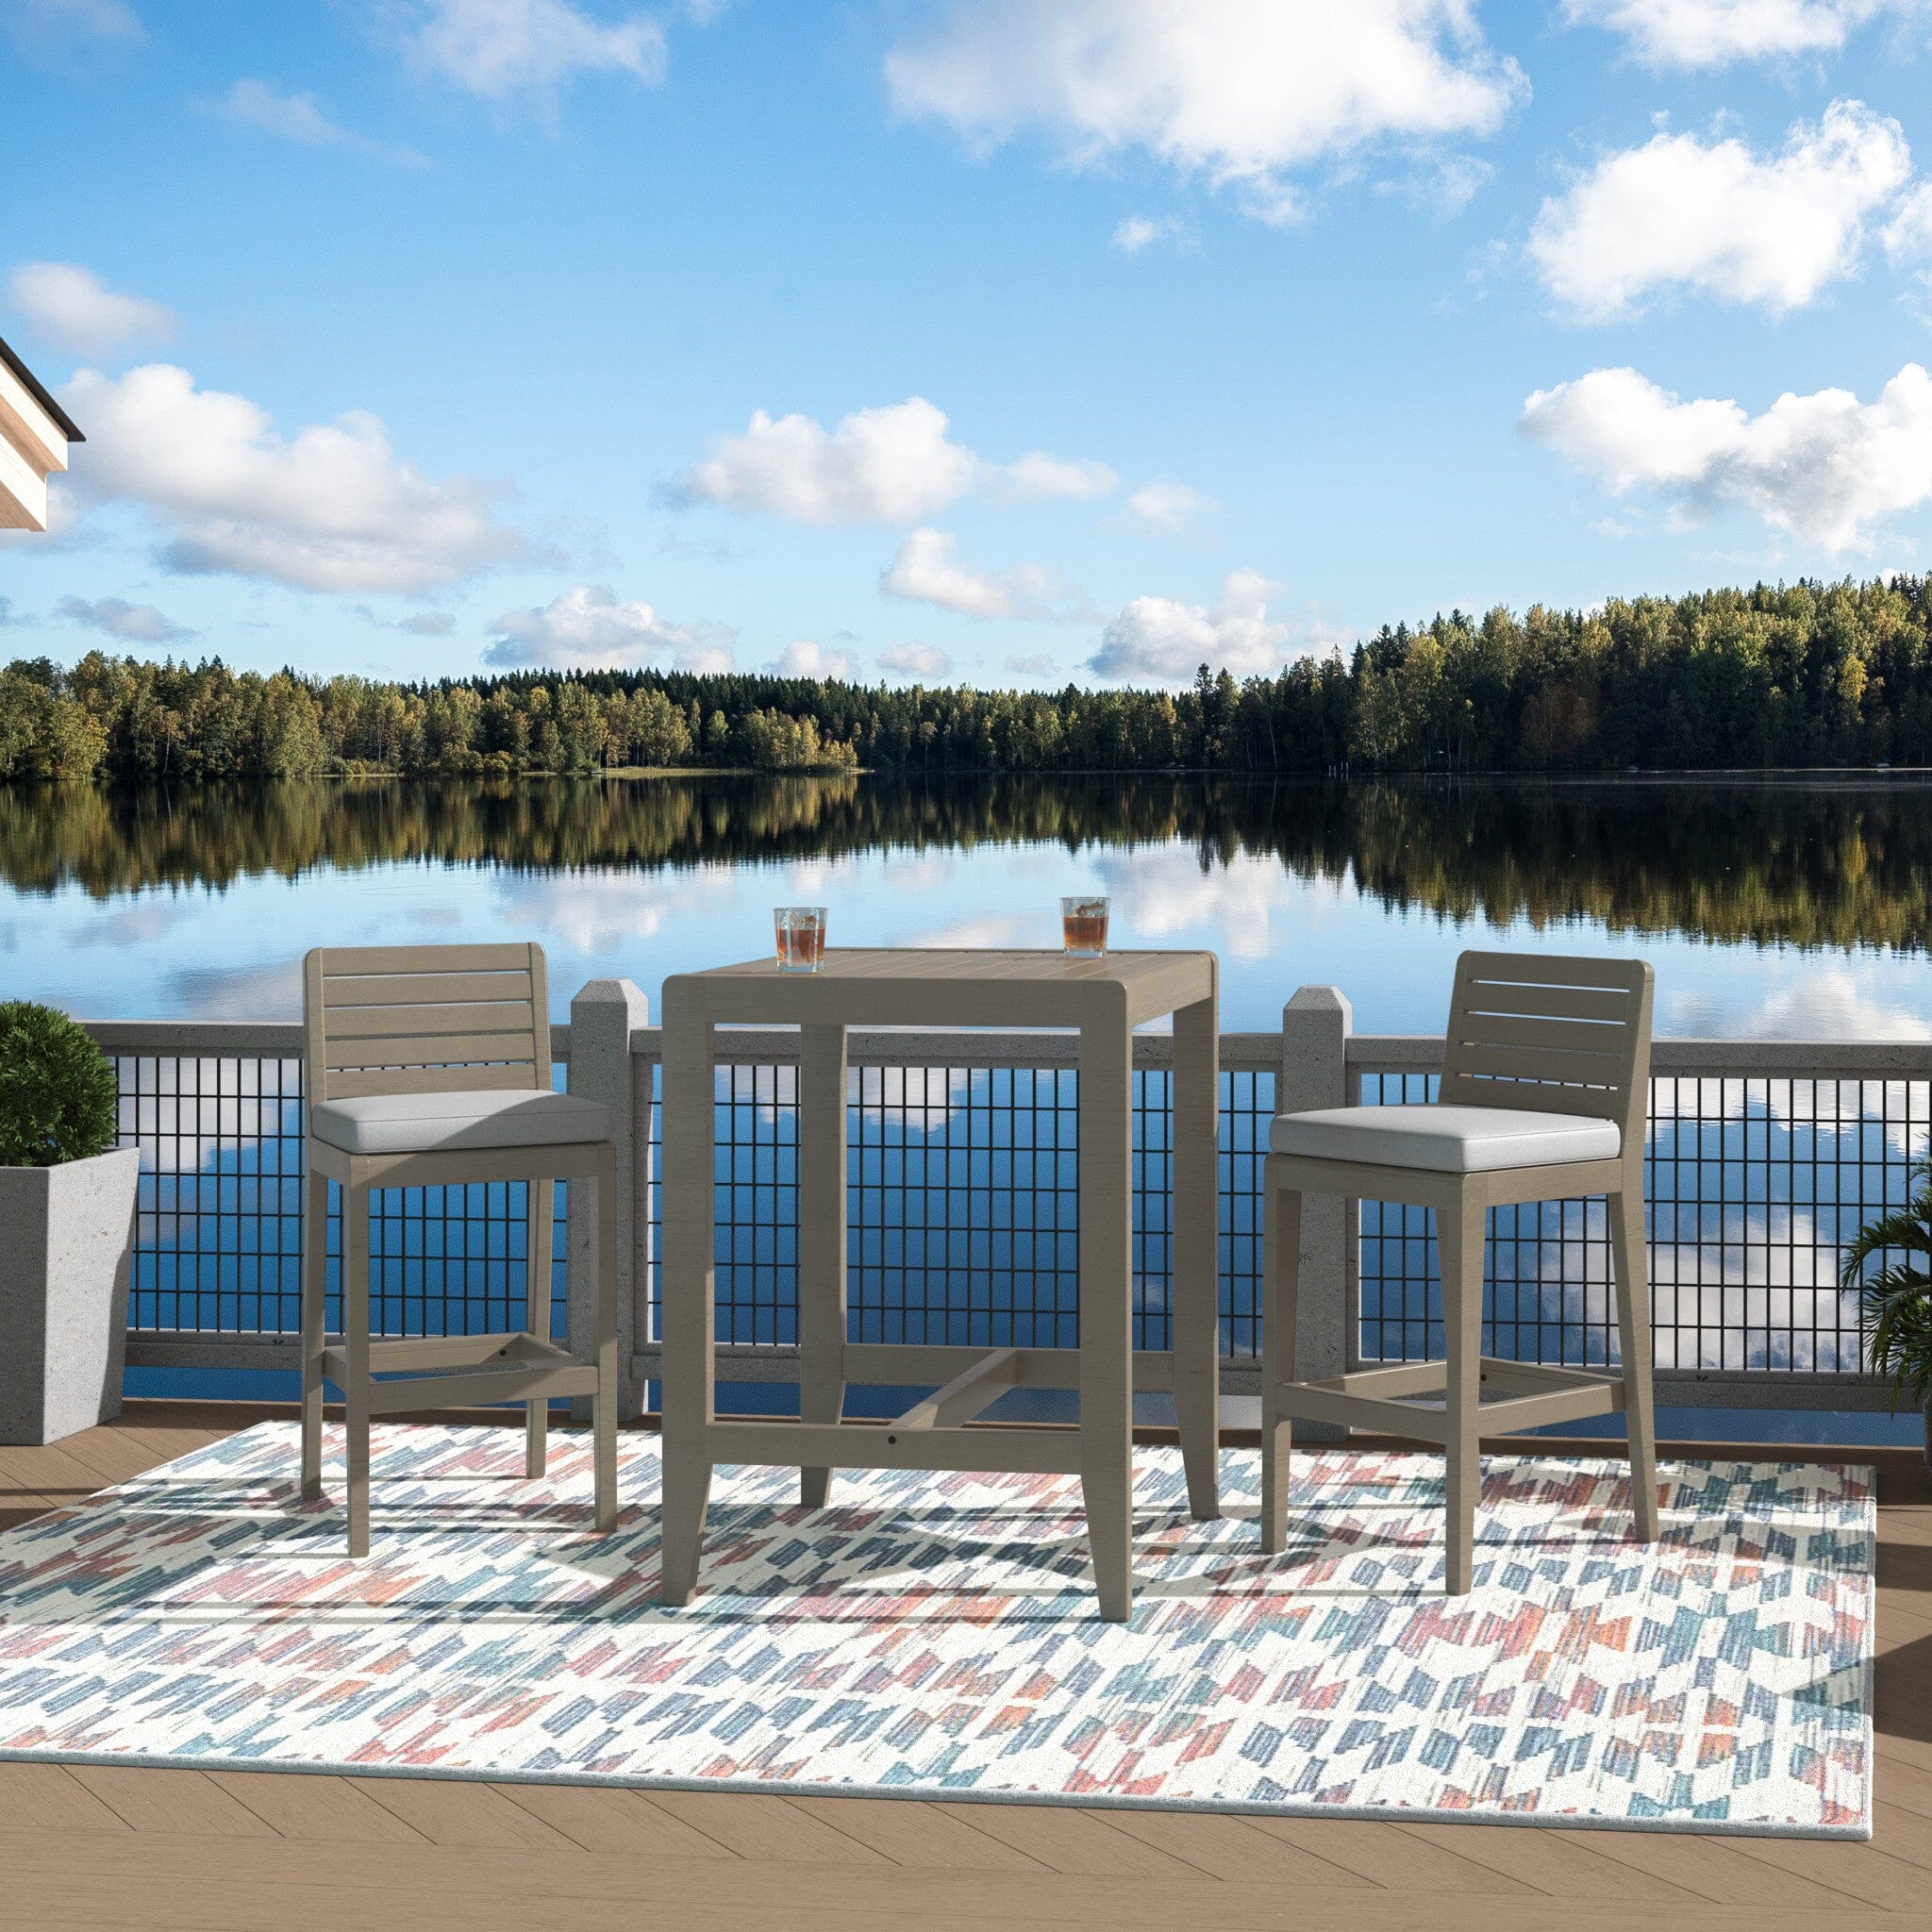 Transitional Outdoor High Bistro Table and Two Stools By Sustain Outdoor Dining Table Sustain